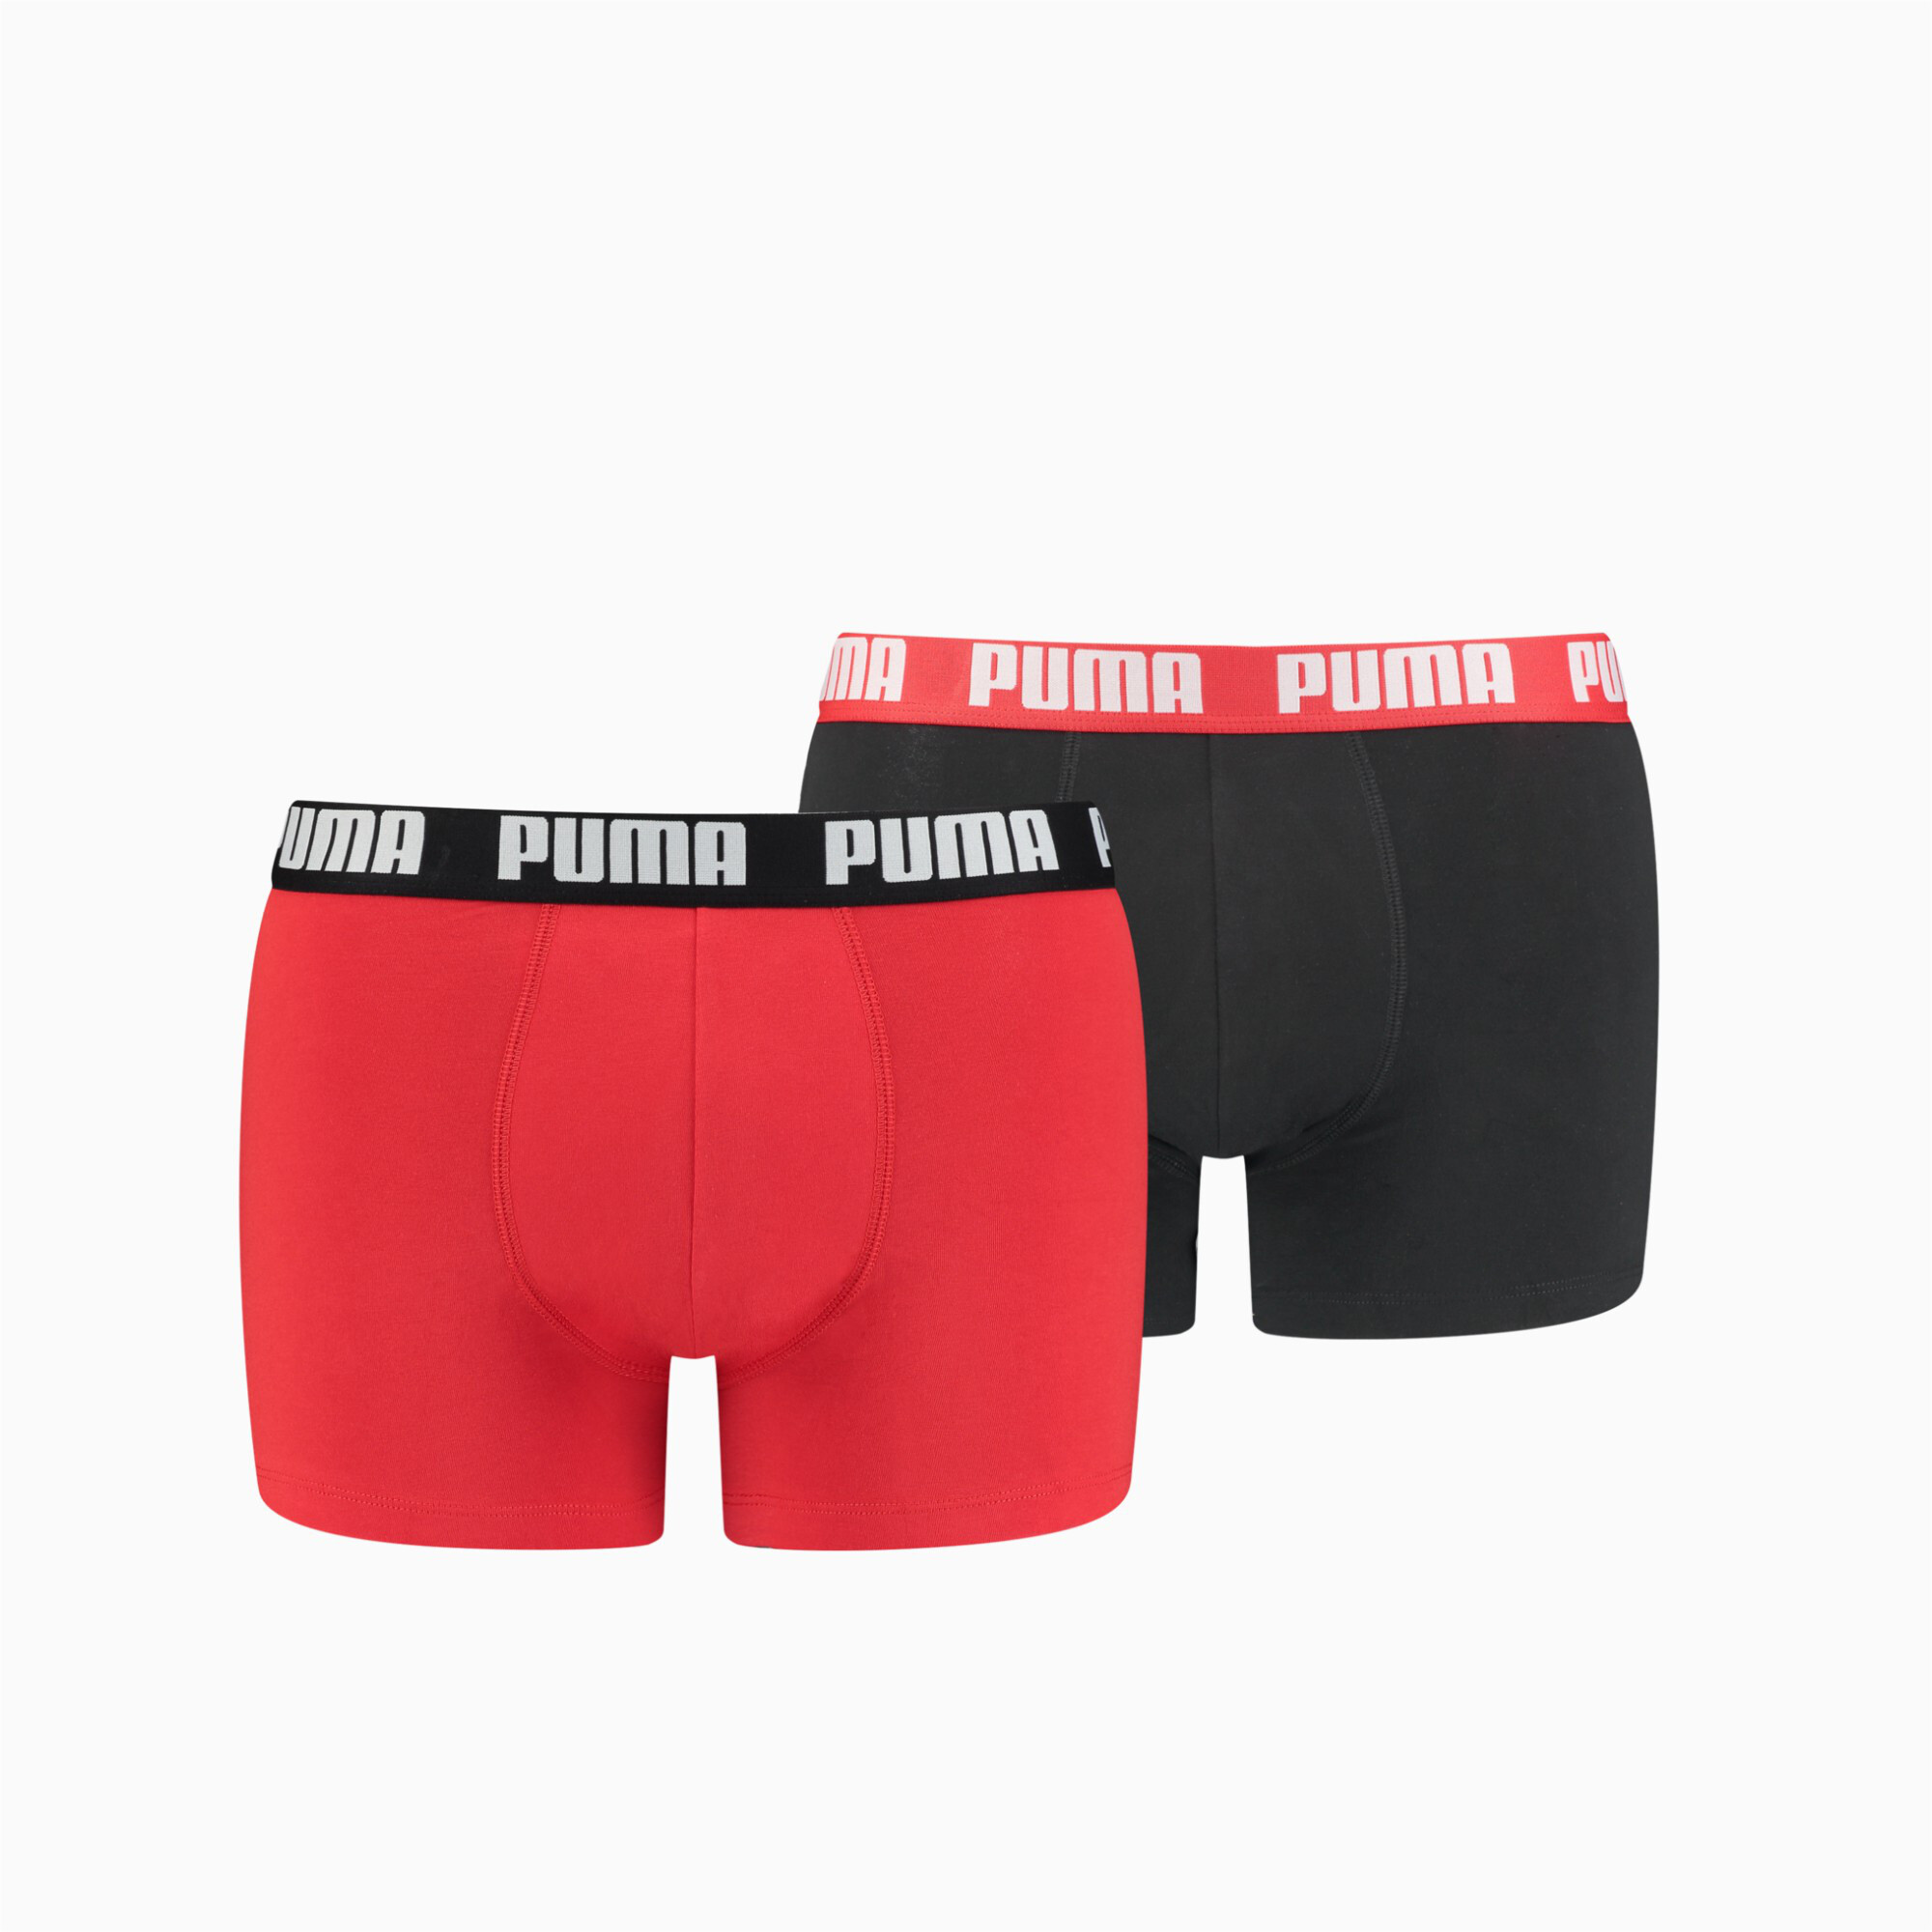 Men's PUMA Basic Boxers 2 Pack In Red, Size Small